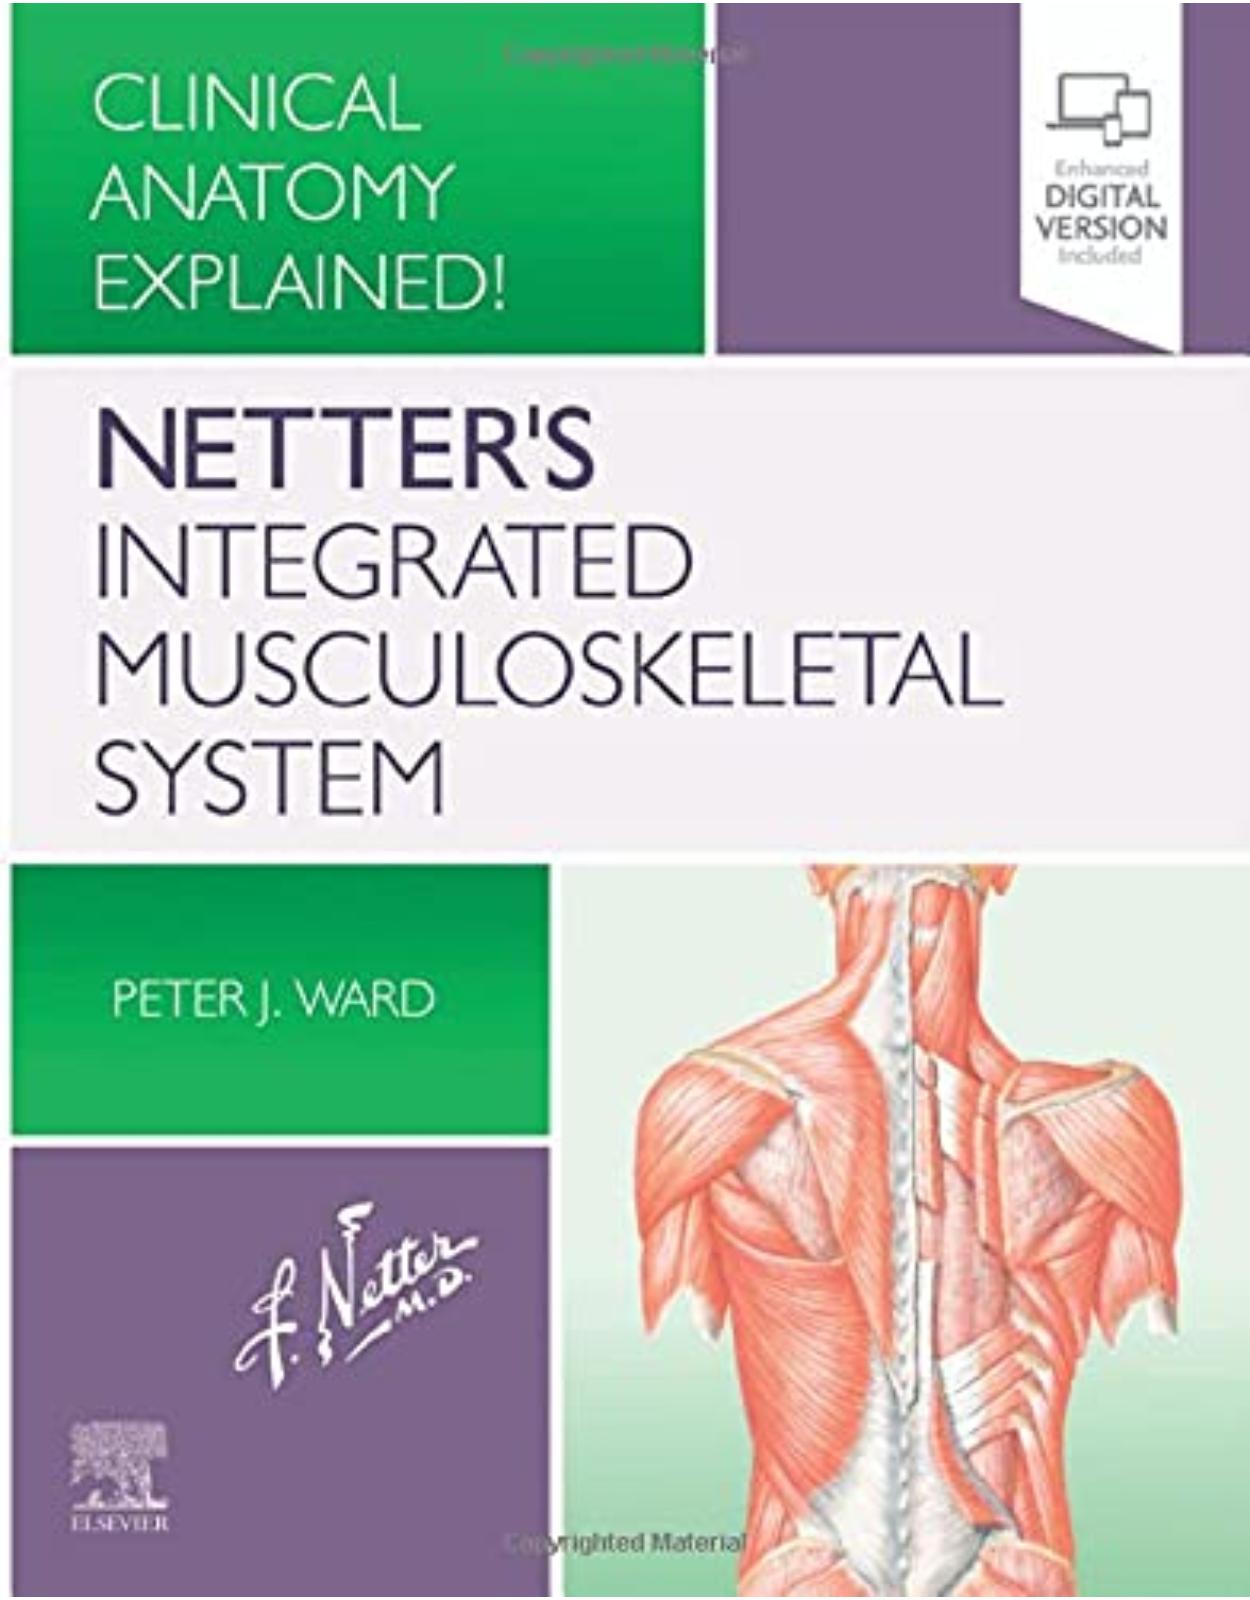 Netter's Integrated Musculoskeletal System: Clinical Anatomy Explained!